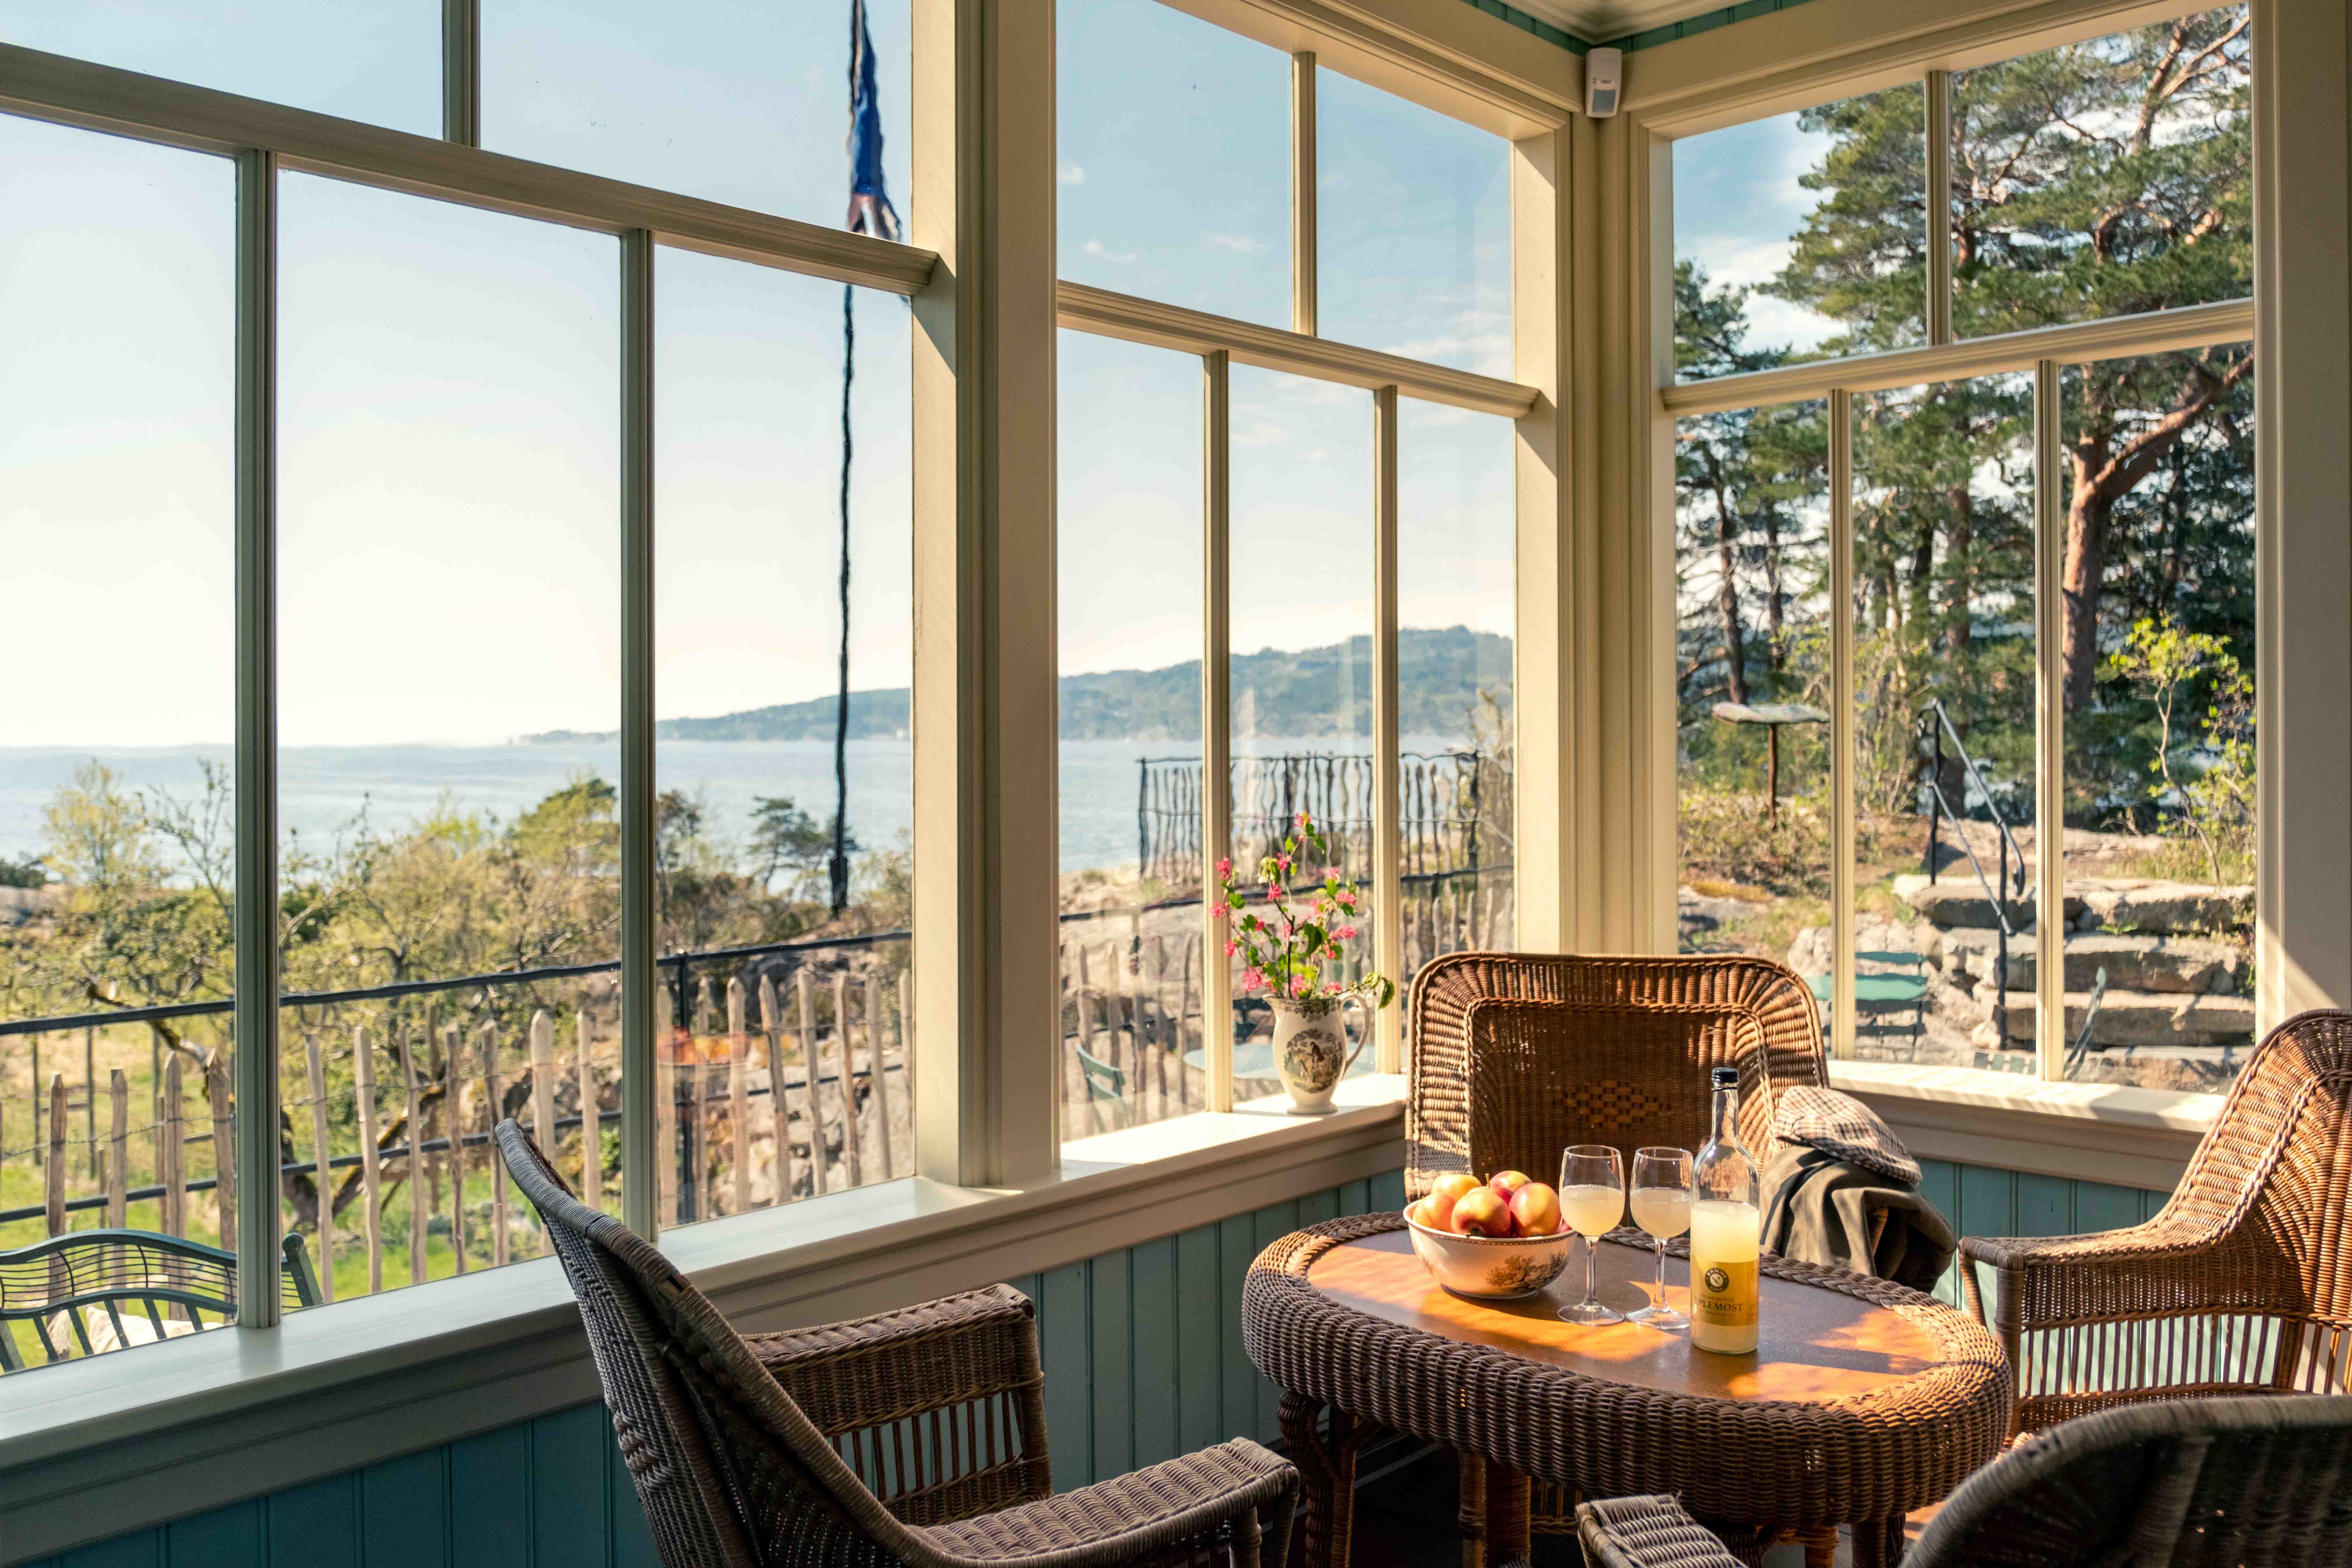 The veranda with views out to the Oslofjord ©Per Sollerman